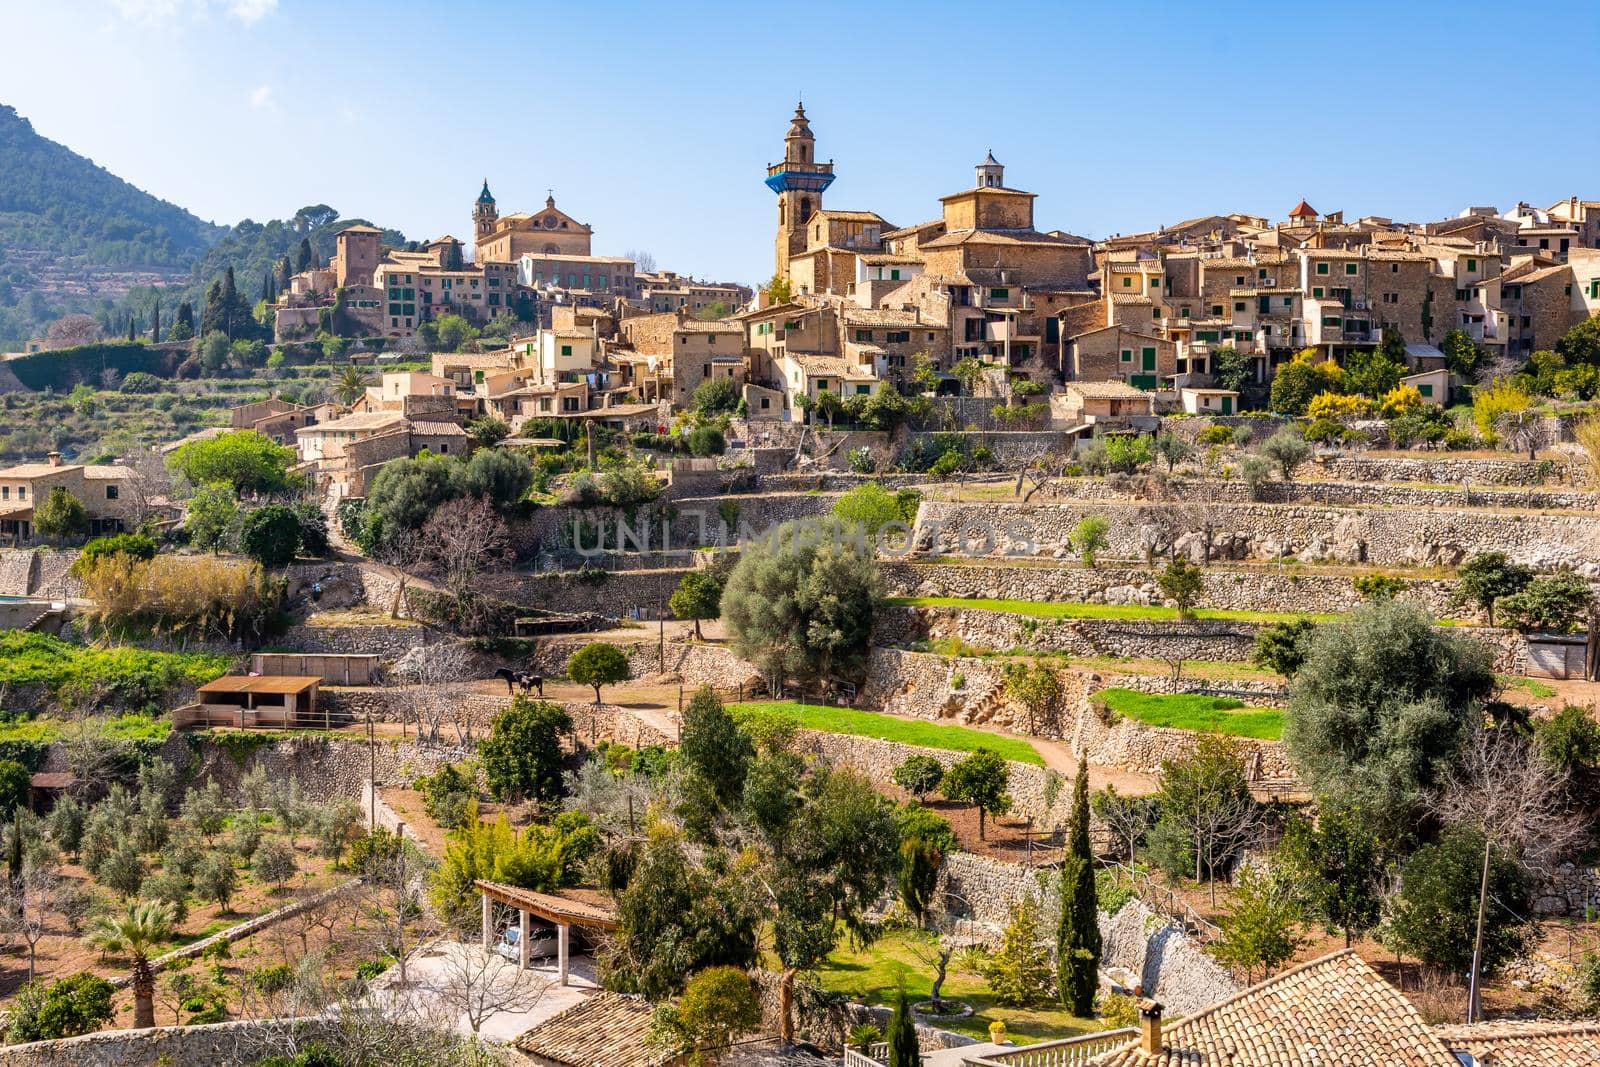 Beautiful view of the stairs and the buildings in Valldemossa, Mallorca Spain on a sunny day by bildgigant